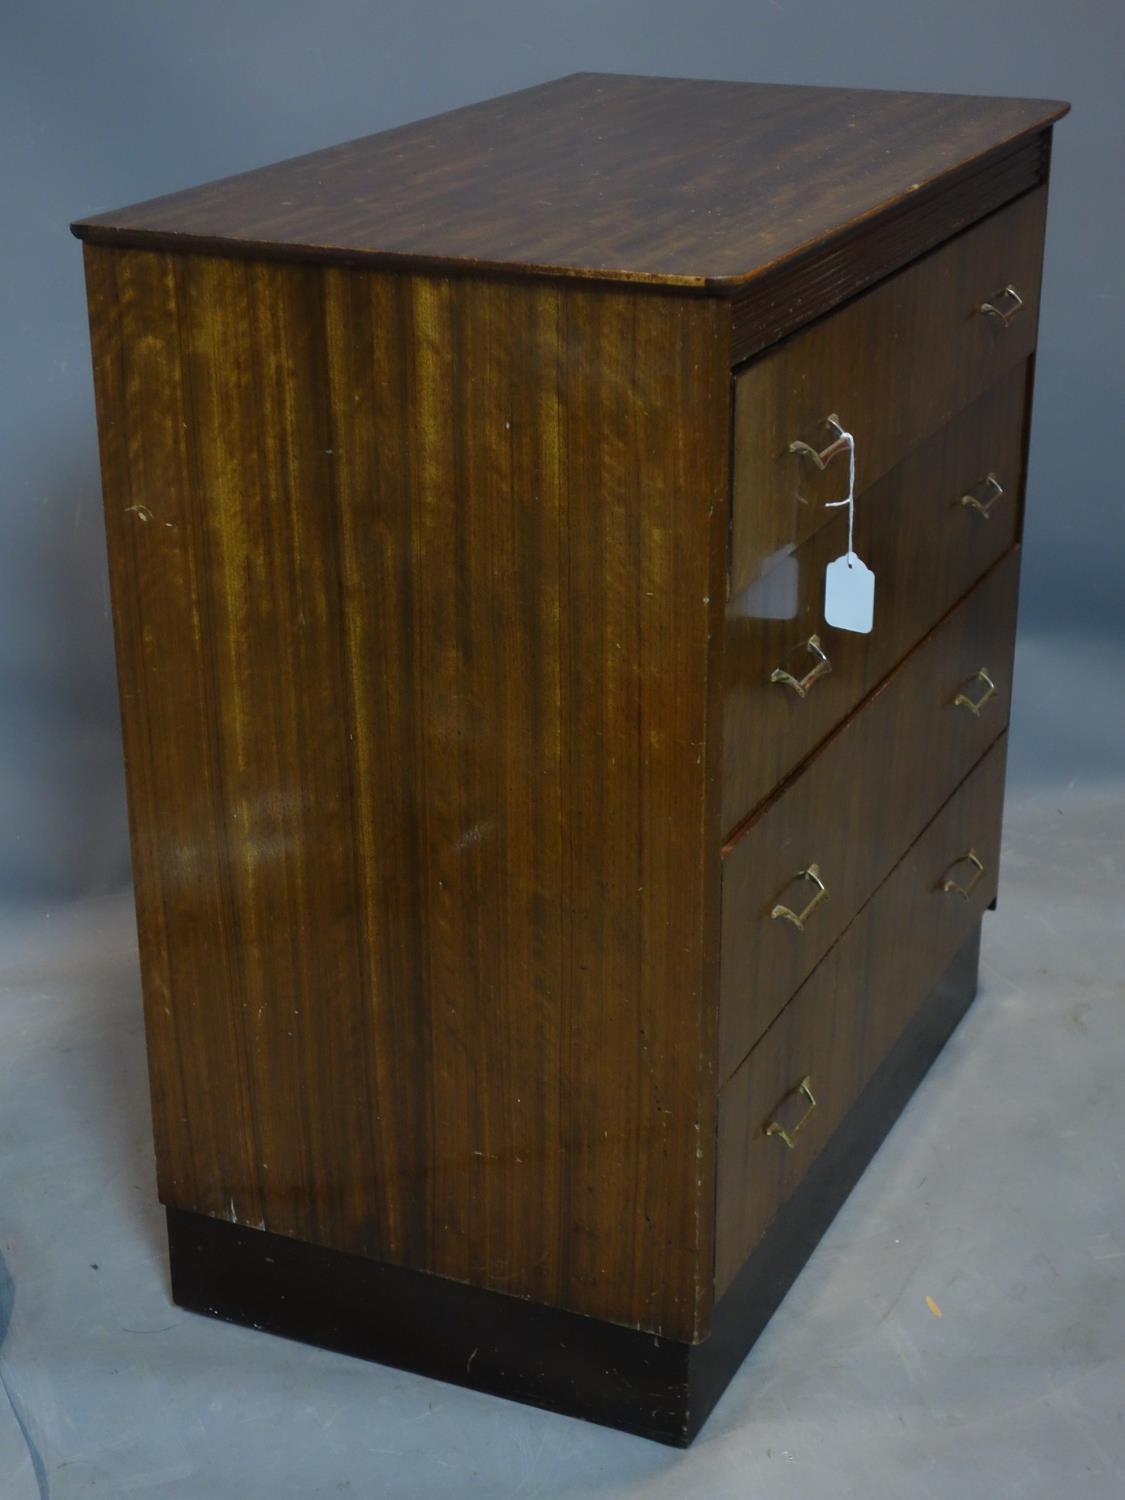 A 20th century teak chest of drawers by 'Golden key', H.87 W.81 D.47cm - Image 2 of 2